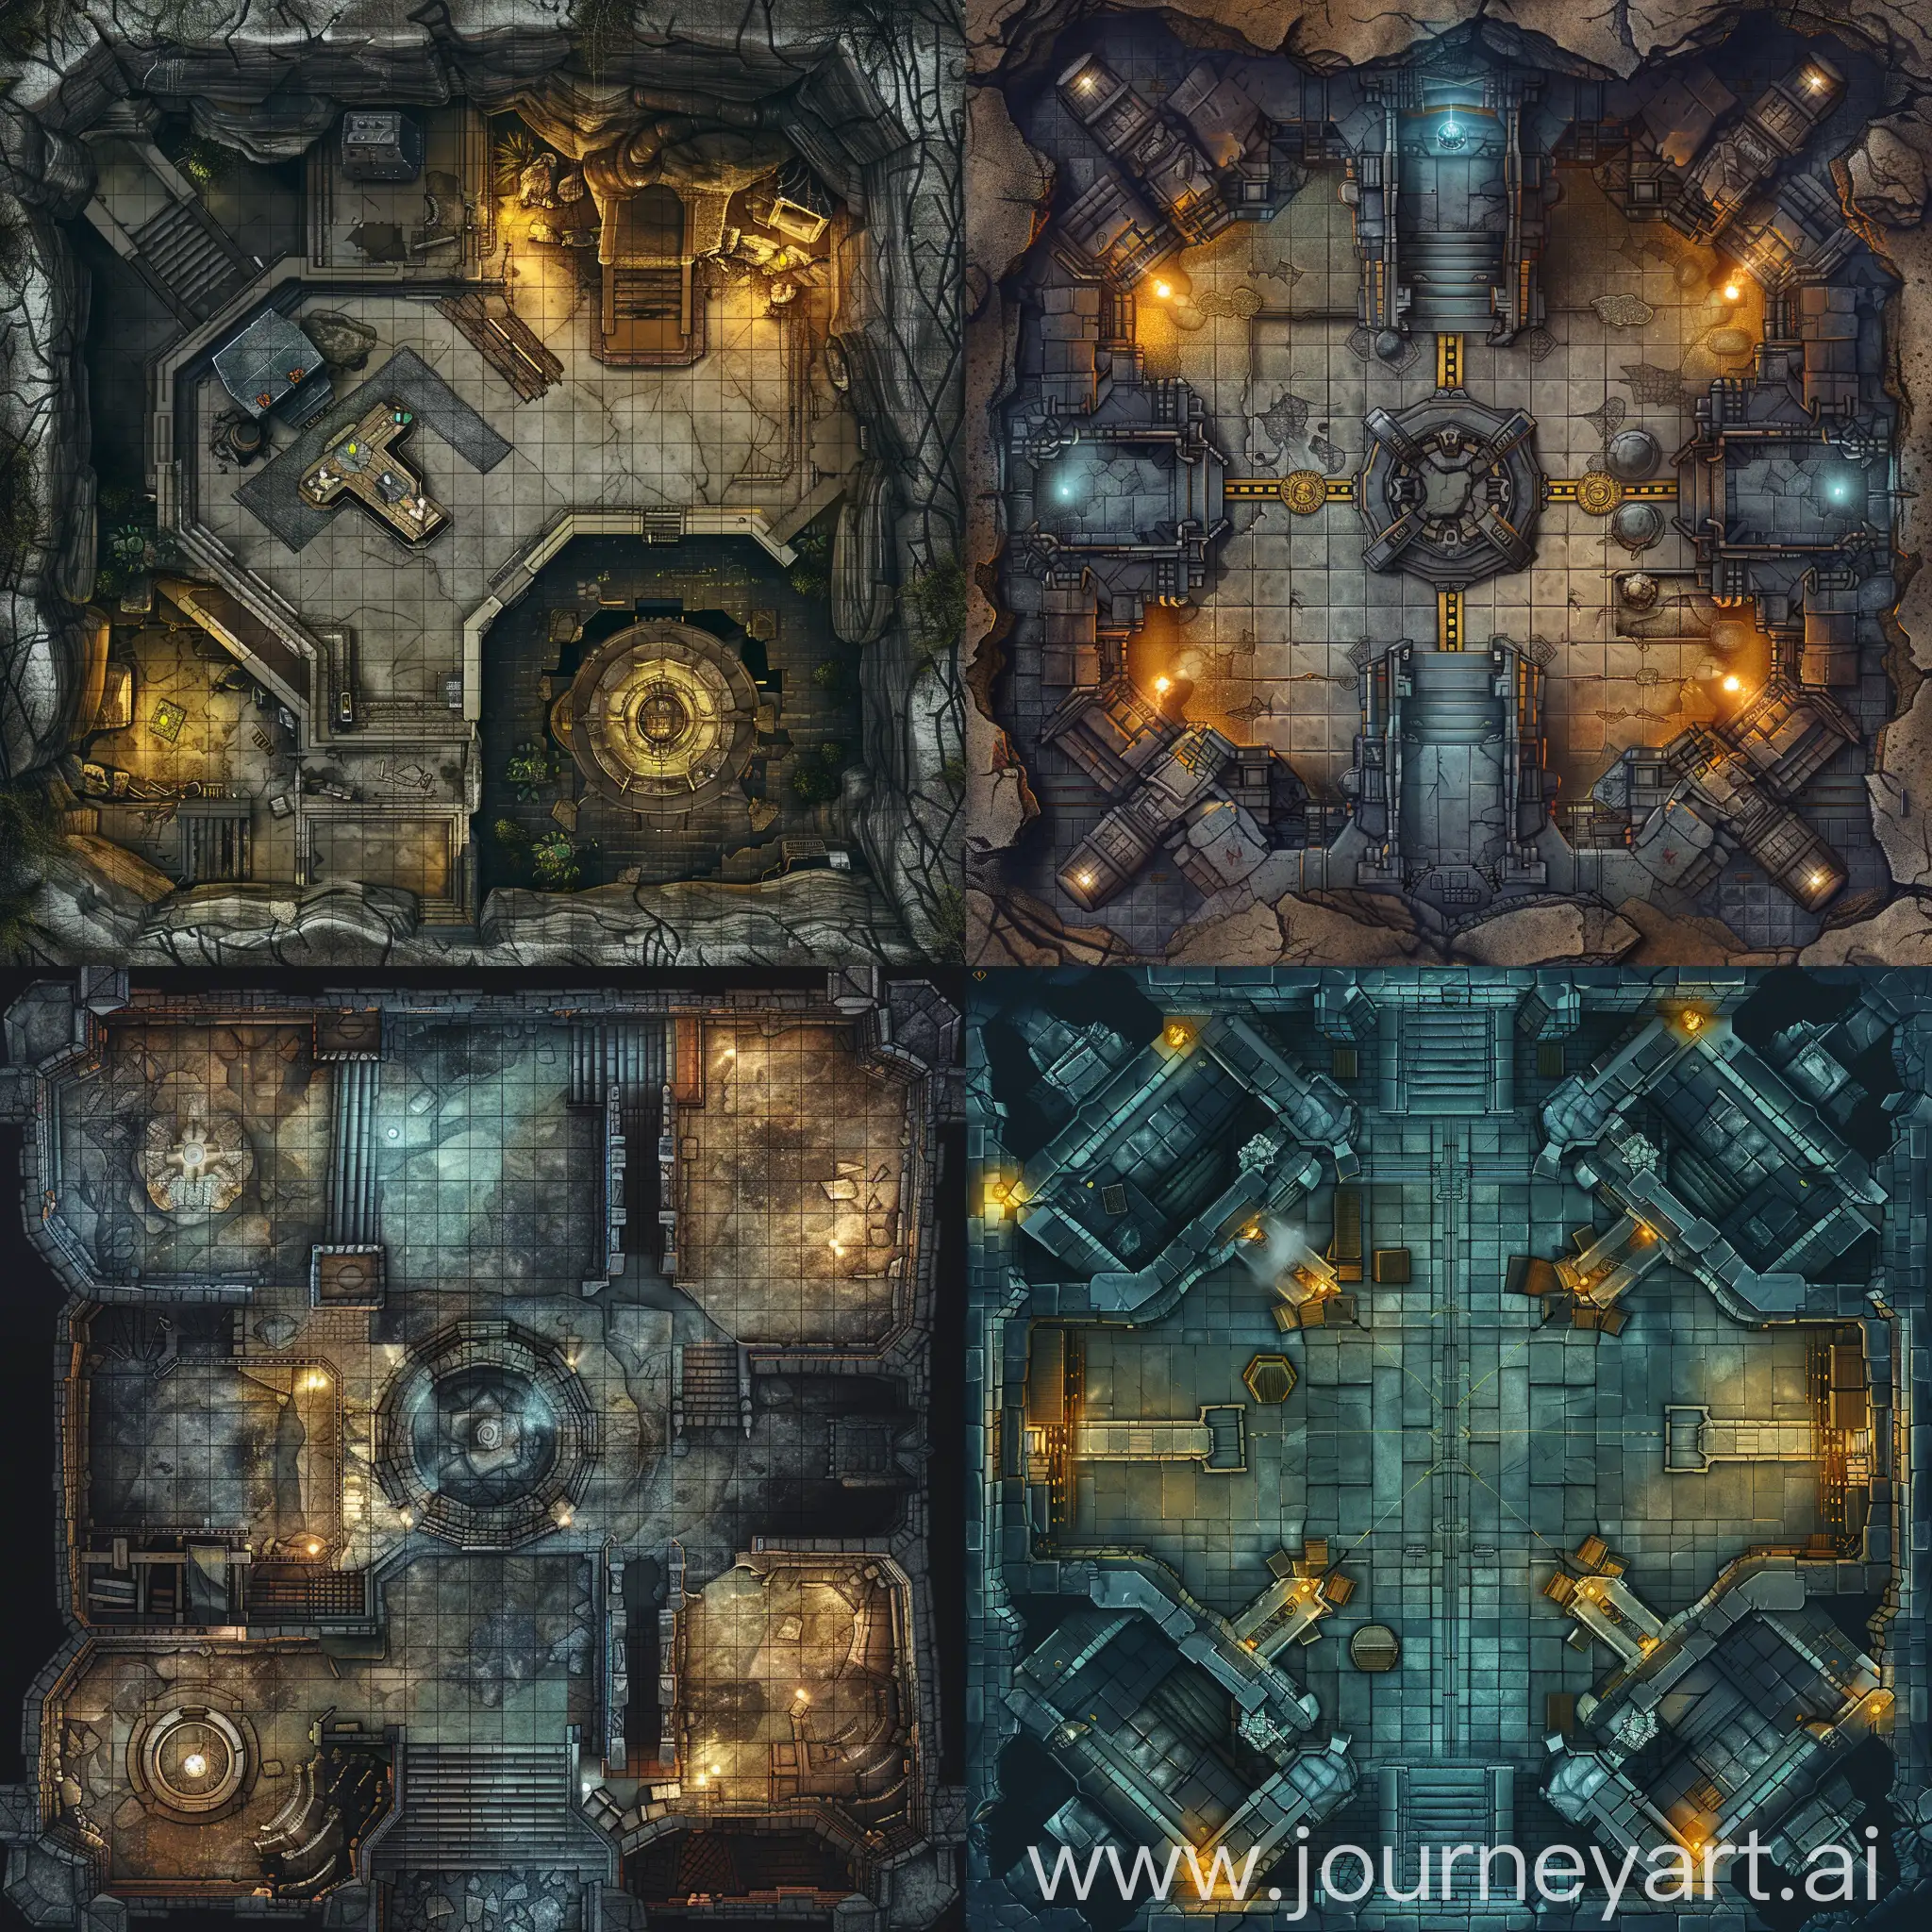 Underground-Laboratory-Battle-Map-for-Dungeons-and-Dragons